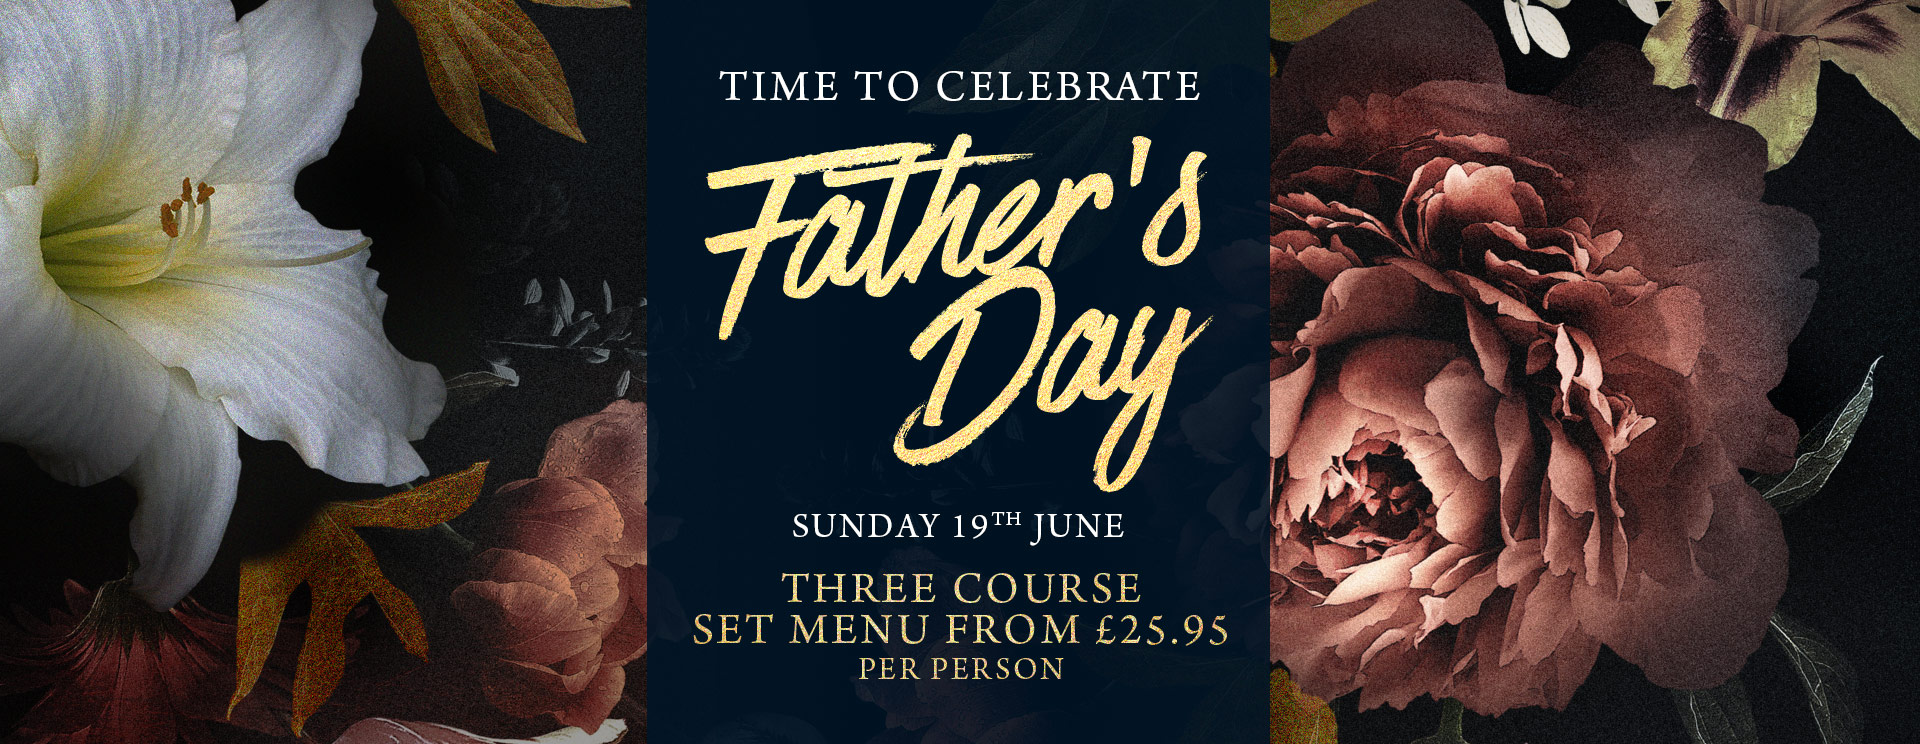 Fathers Day at The Pheasant